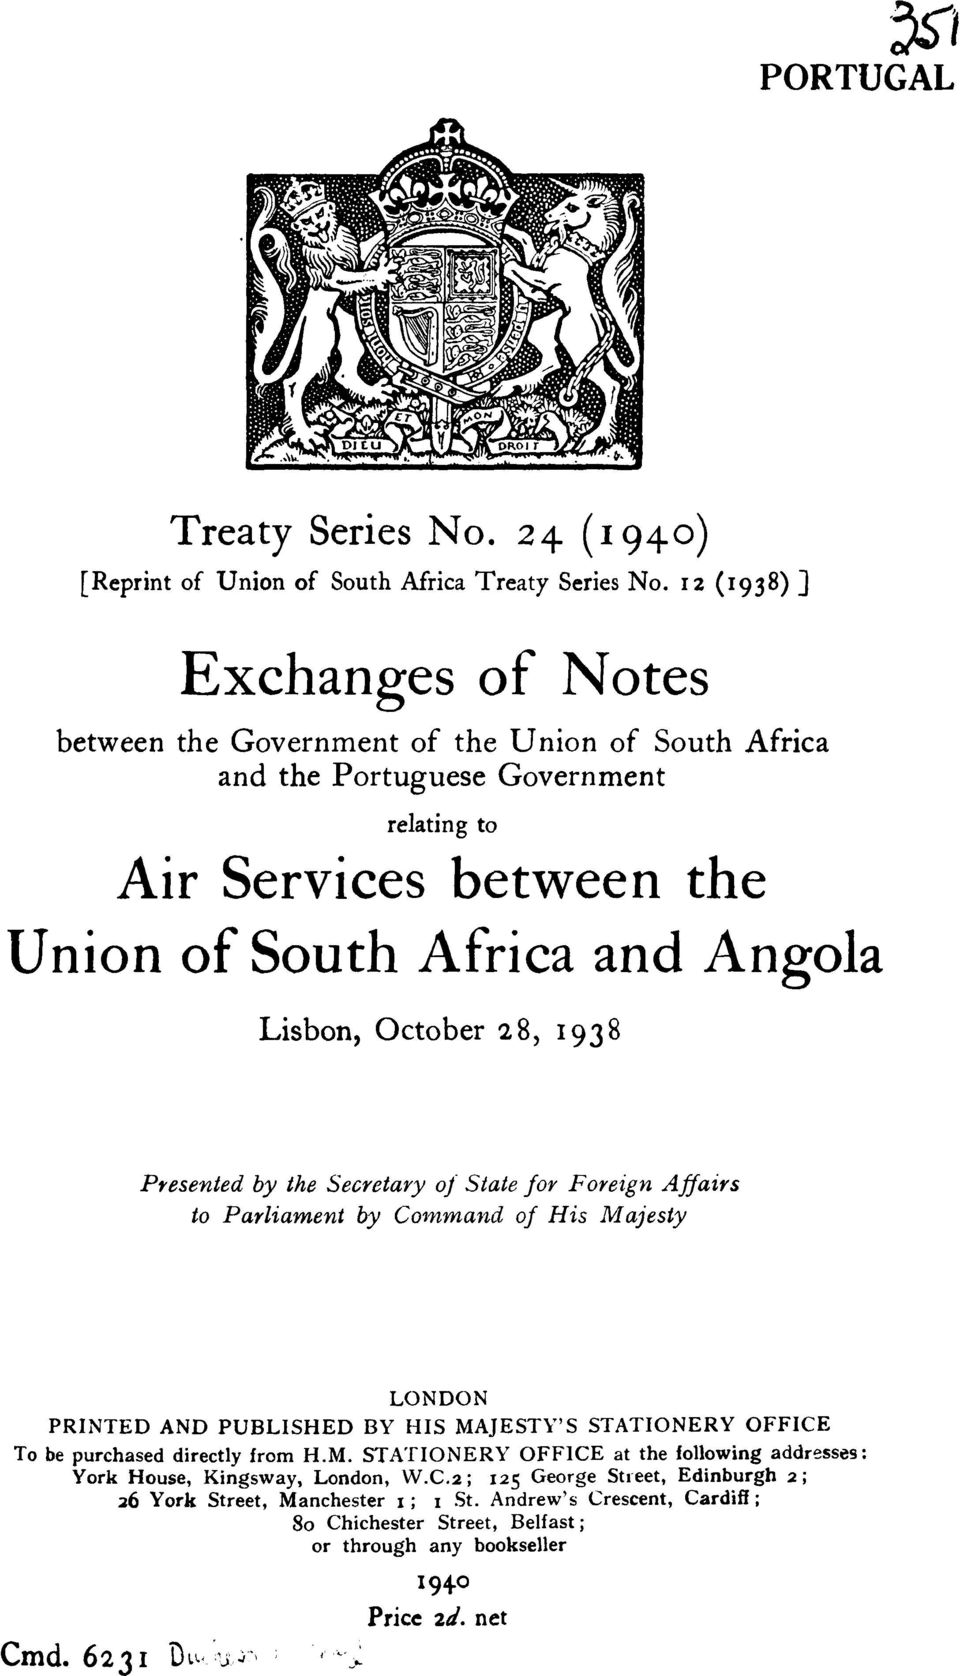 October 28, 1938 Presented by the Secretary of State for Foreign Affairs to Parliament by Command of His Majesty LONDON PRINTED AND PUBLISHED BY HIS MAJESTY'S STATIONERY OFFICE To be